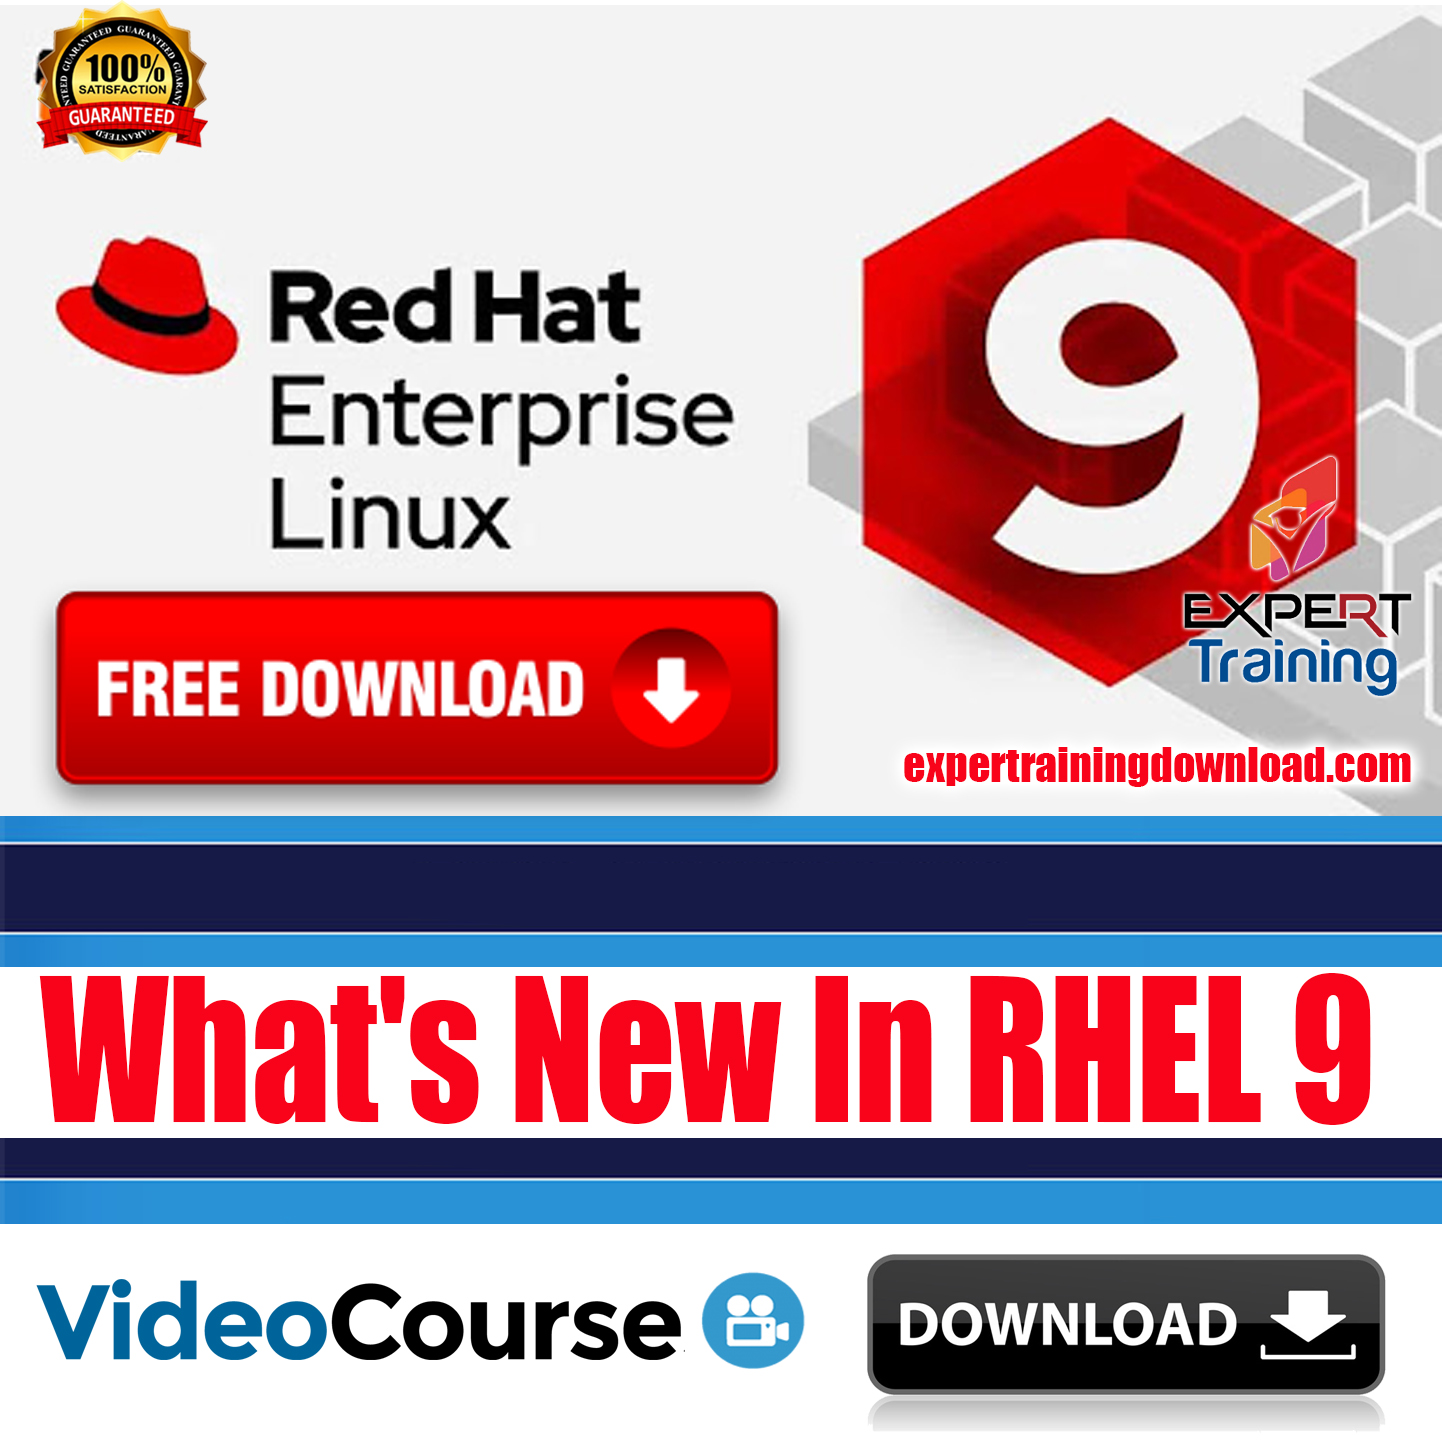 What’s New In RHEL 9 (FREE DOWNLOAD)